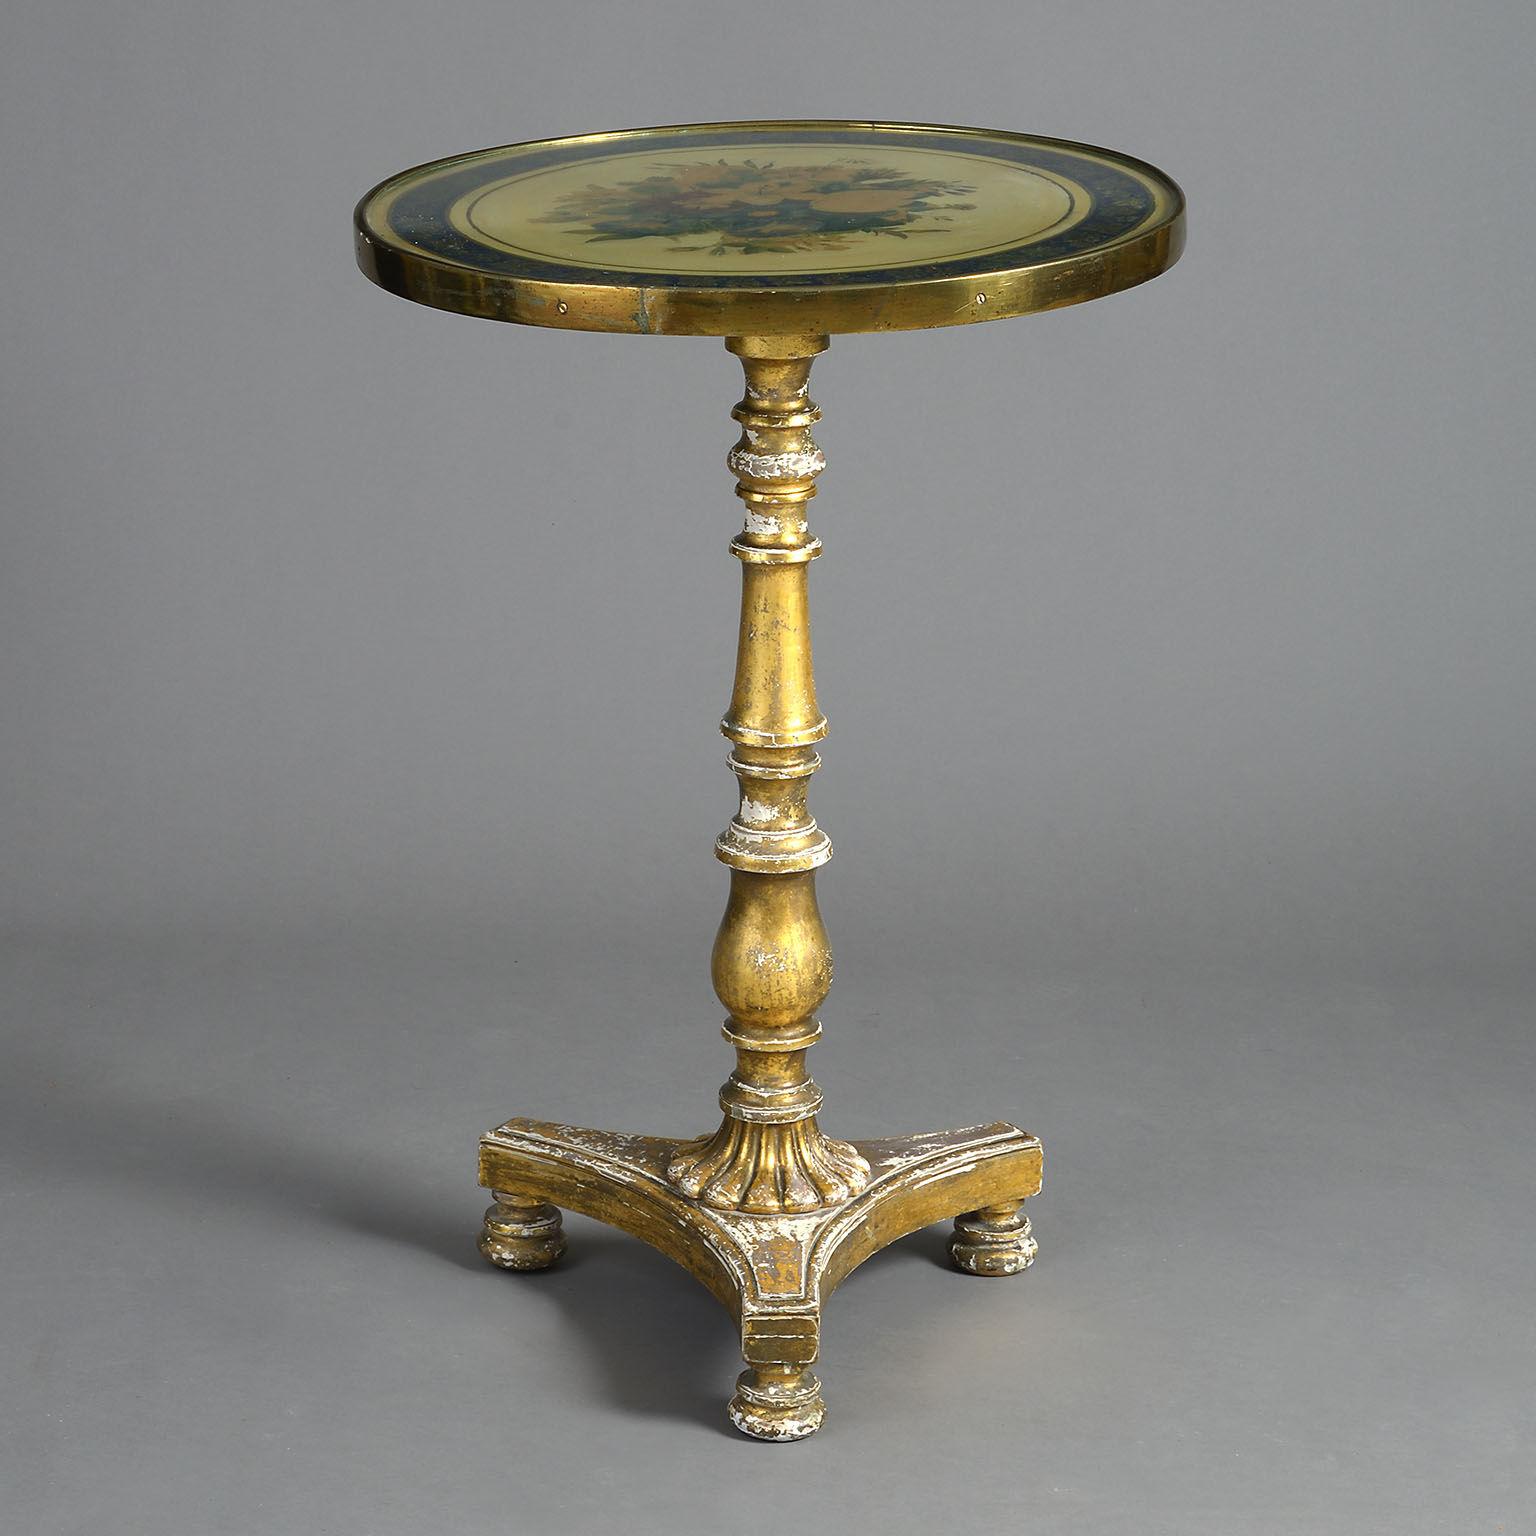 The hand-painted floral top protected under glass with a lacquered brass border. The tilt-top action supported on a gilt-wood baluster turned support with a platform base. Bearing a makers label 